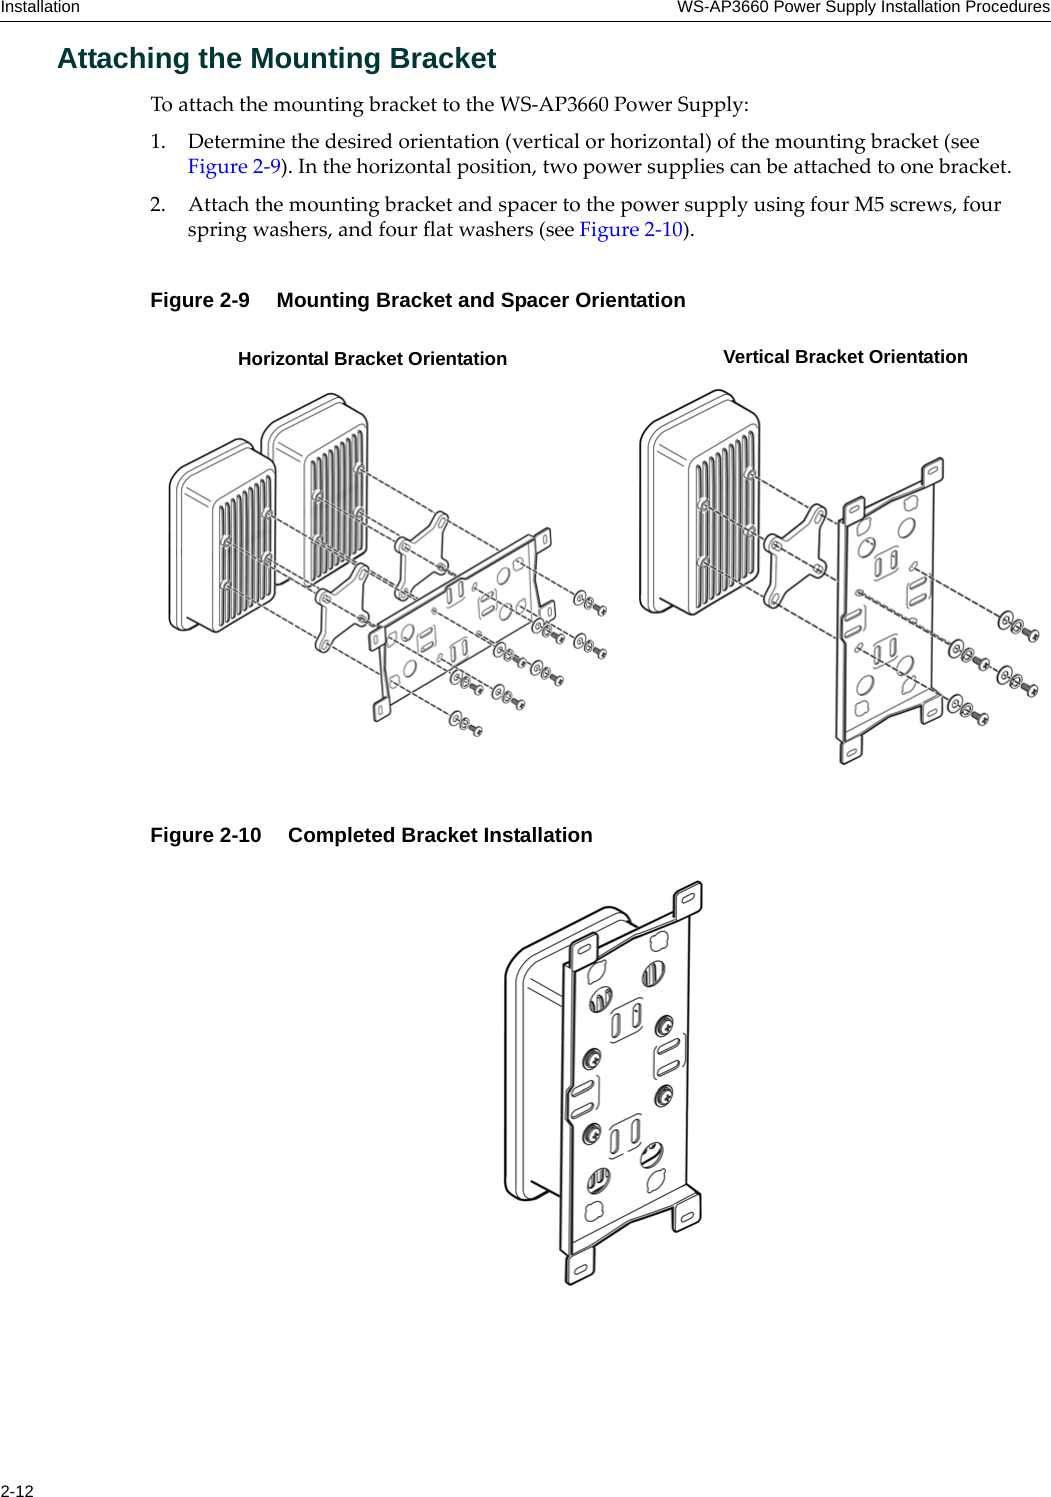 Installation WS-AP3660 Power Supply Installation Procedures2-12Attaching the Mounting BracketTo attach the mounting bracket to the WS-AP3660 Power Supply:1. Determine the desired orientation (vertical or horizontal) of the mounting bracket (see Figure 2-9). In the horizontal position, two power supplies can be attached to one bracket.2. Attach the mounting bracket and spacer to the power supply using four M5 screws, four spring washers, and four flat washers (see Figure 2-10).Figure 2-9  Mounting Bracket and Spacer OrientationFigure 2-10  Completed Bracket InstallationHorizontal Bracket Orientation Vertical Bracket Orientation